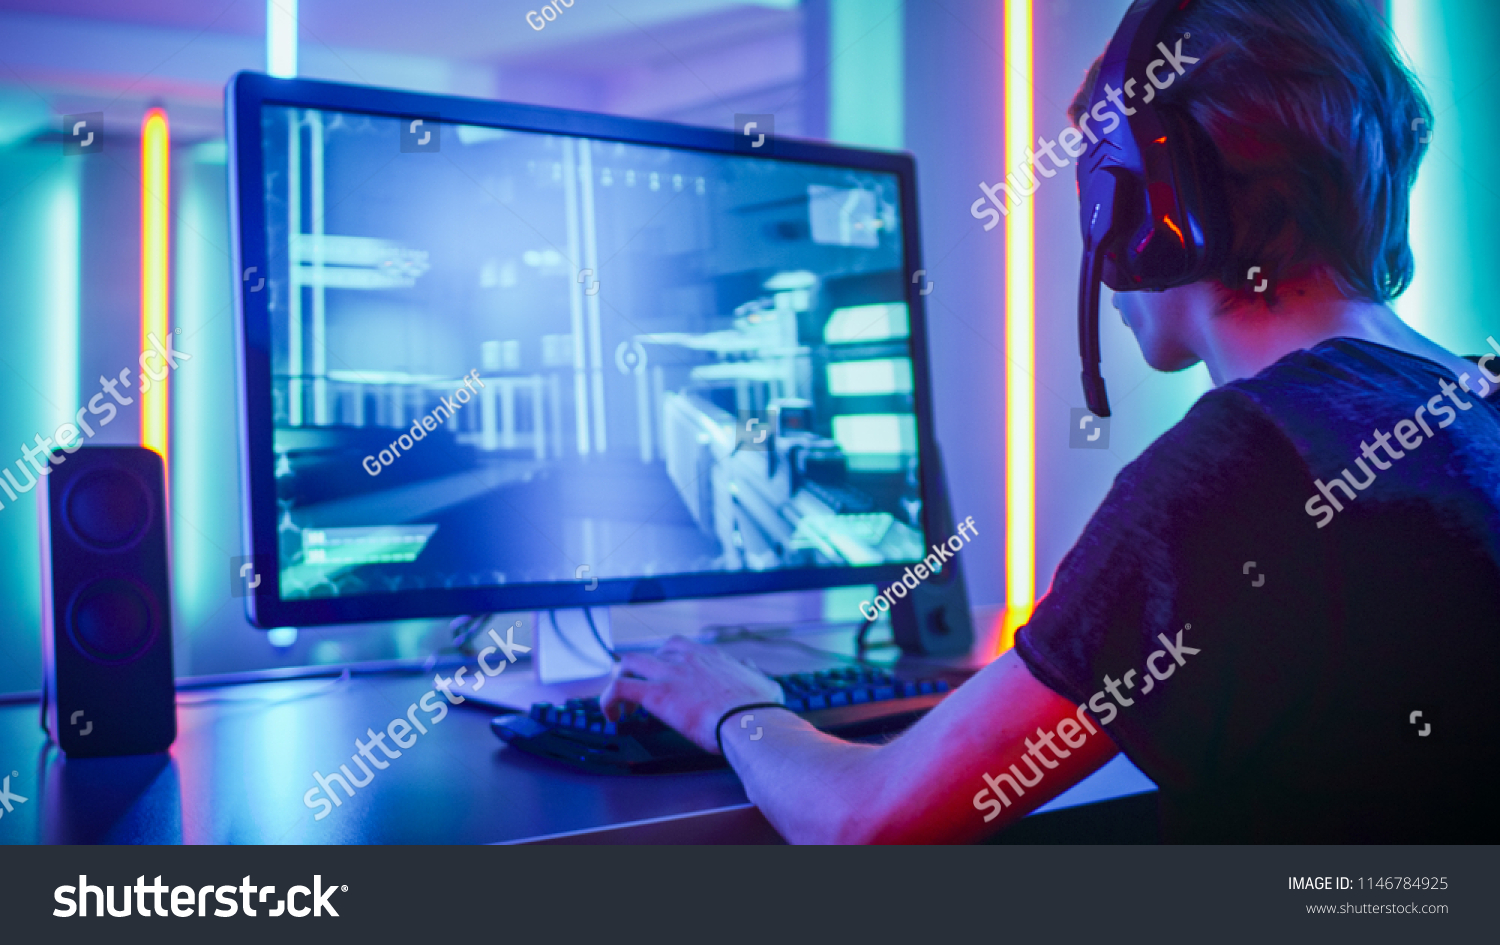 Shot of the Professional Gamer Playing in First-Person Shooter Online Video Game on His Personal Computer. Room Lit by Neon Lights in Retro Arcade Style. Online Cyber e-Sport Internet Championship. #1146784925